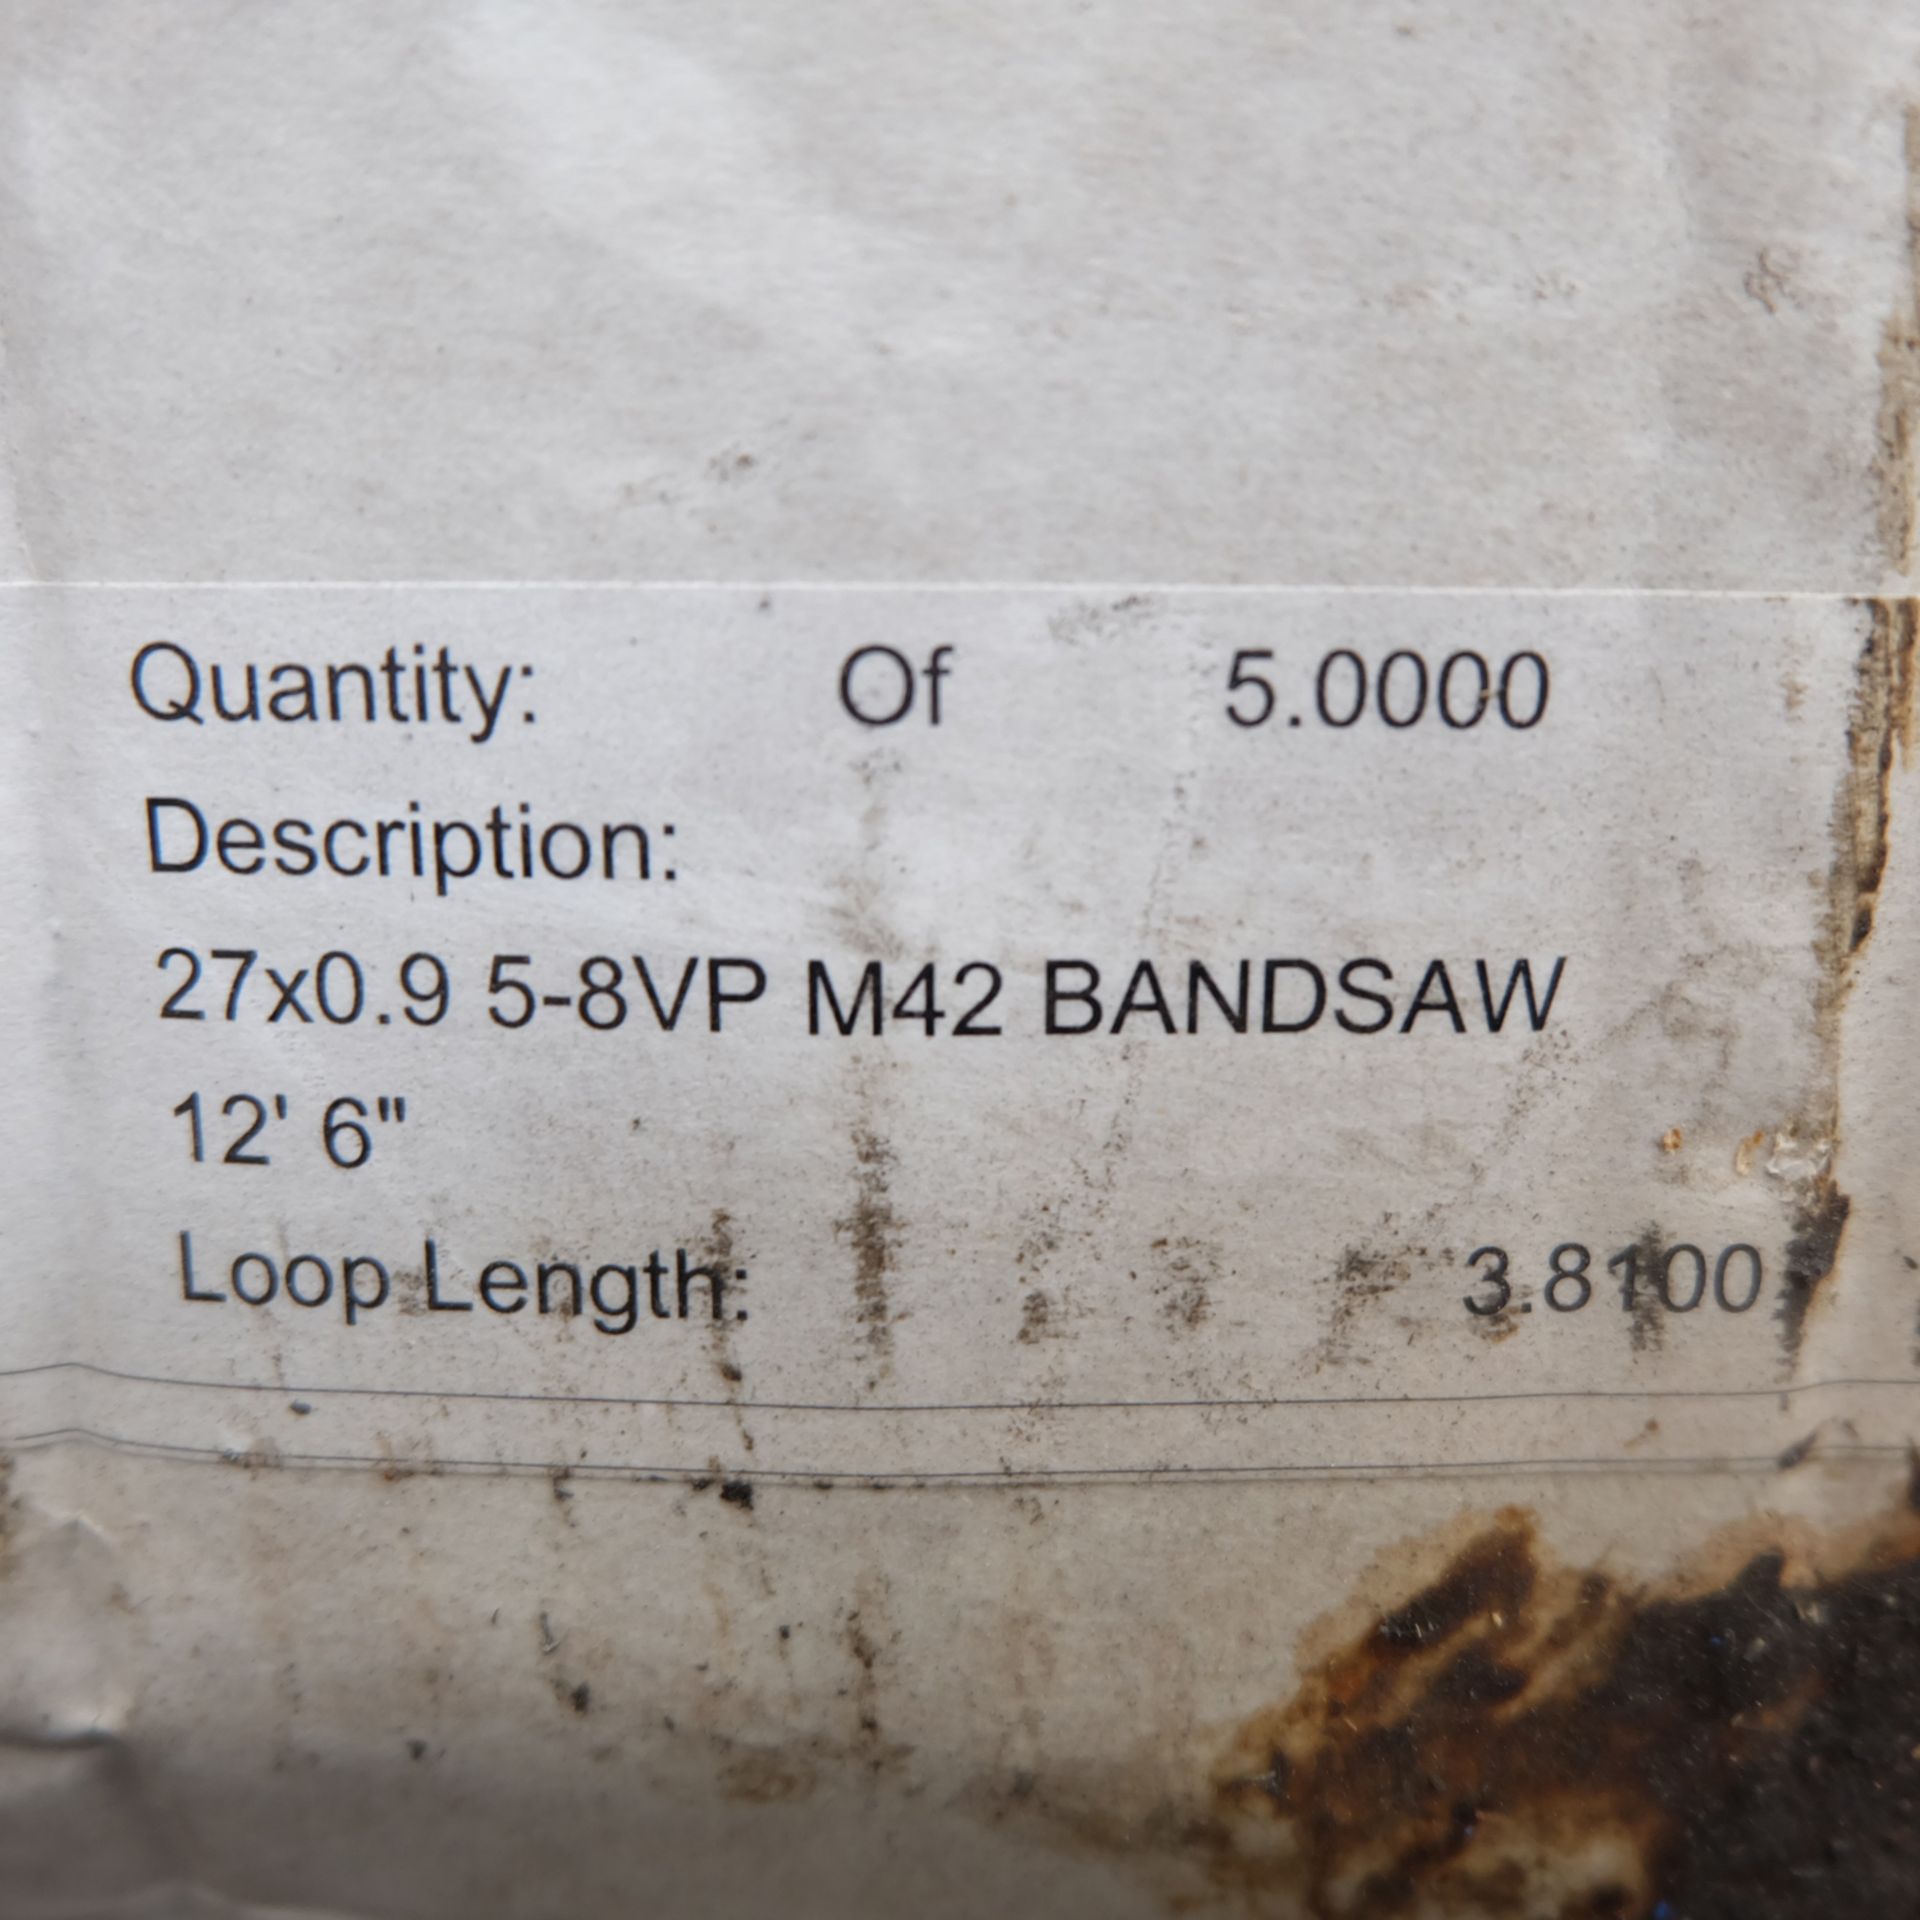 3 x M42 Bandsaw Blades as Lotted. Length 12' 6". - Image 2 of 2